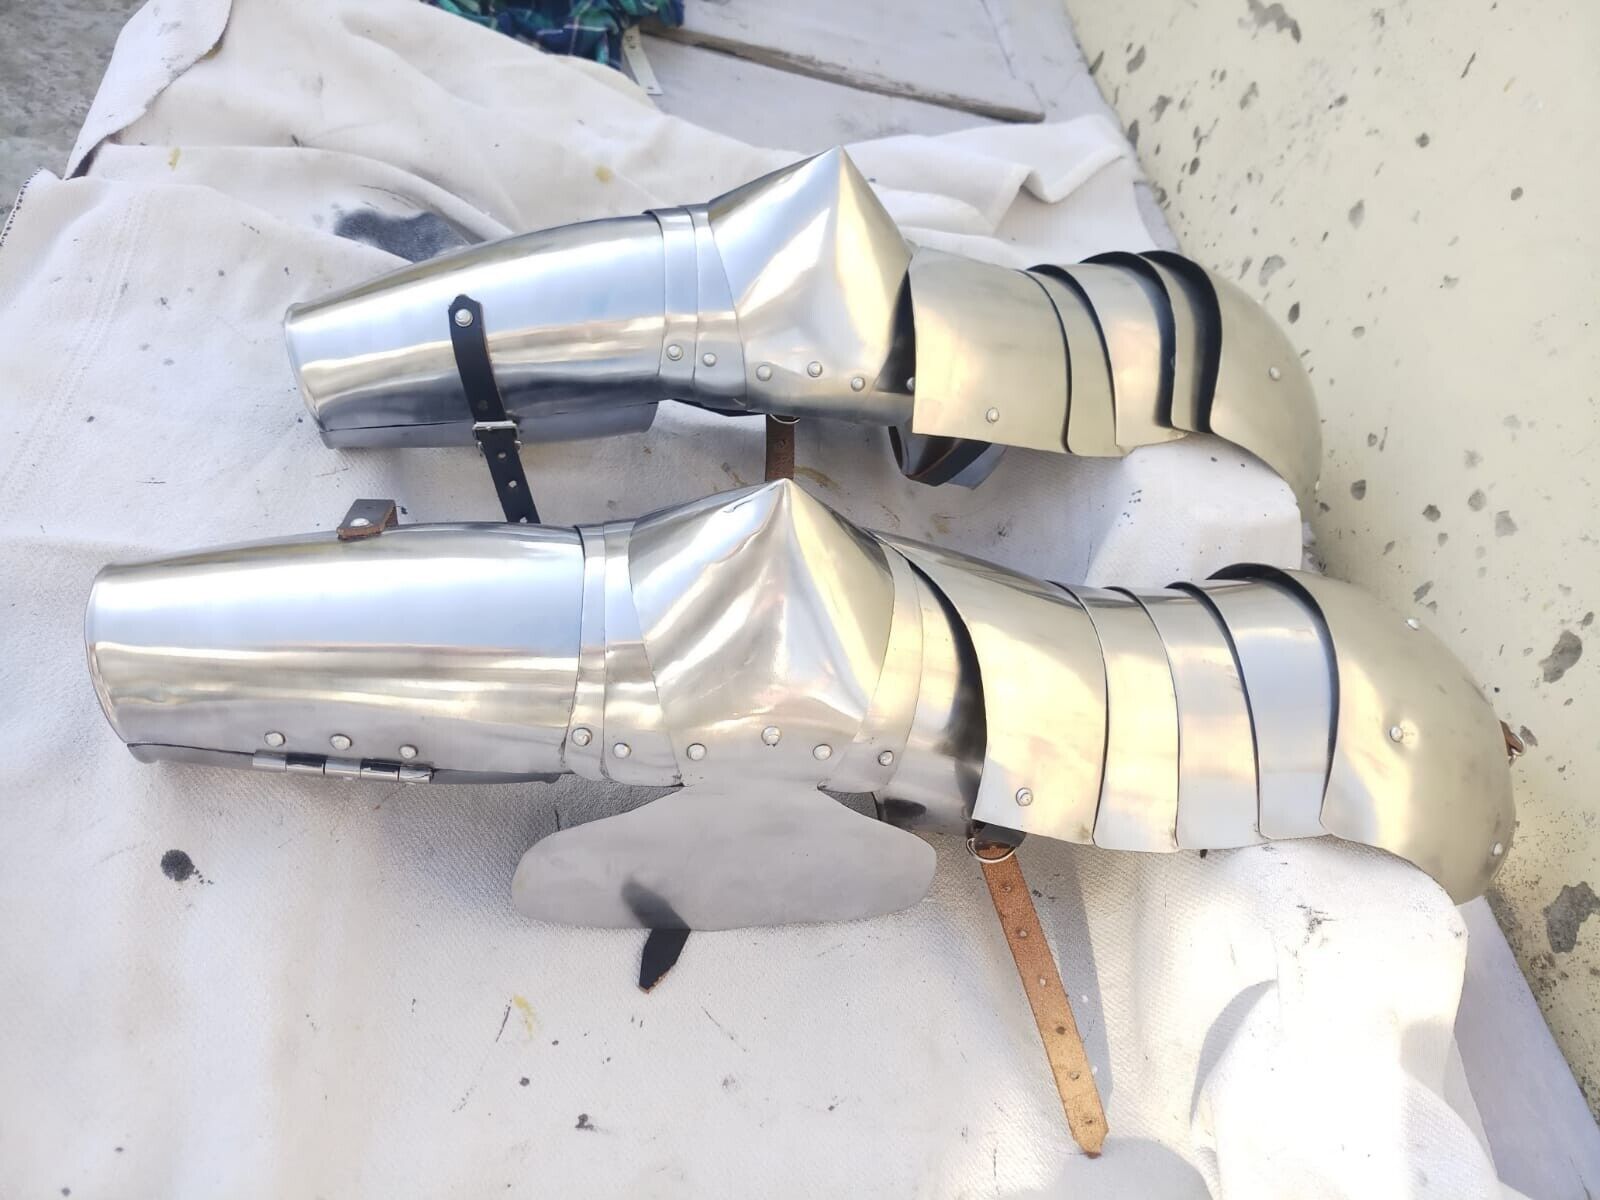 Medieval Complete Full Arms Armor Pauldrons Set For Battle Full Wearable